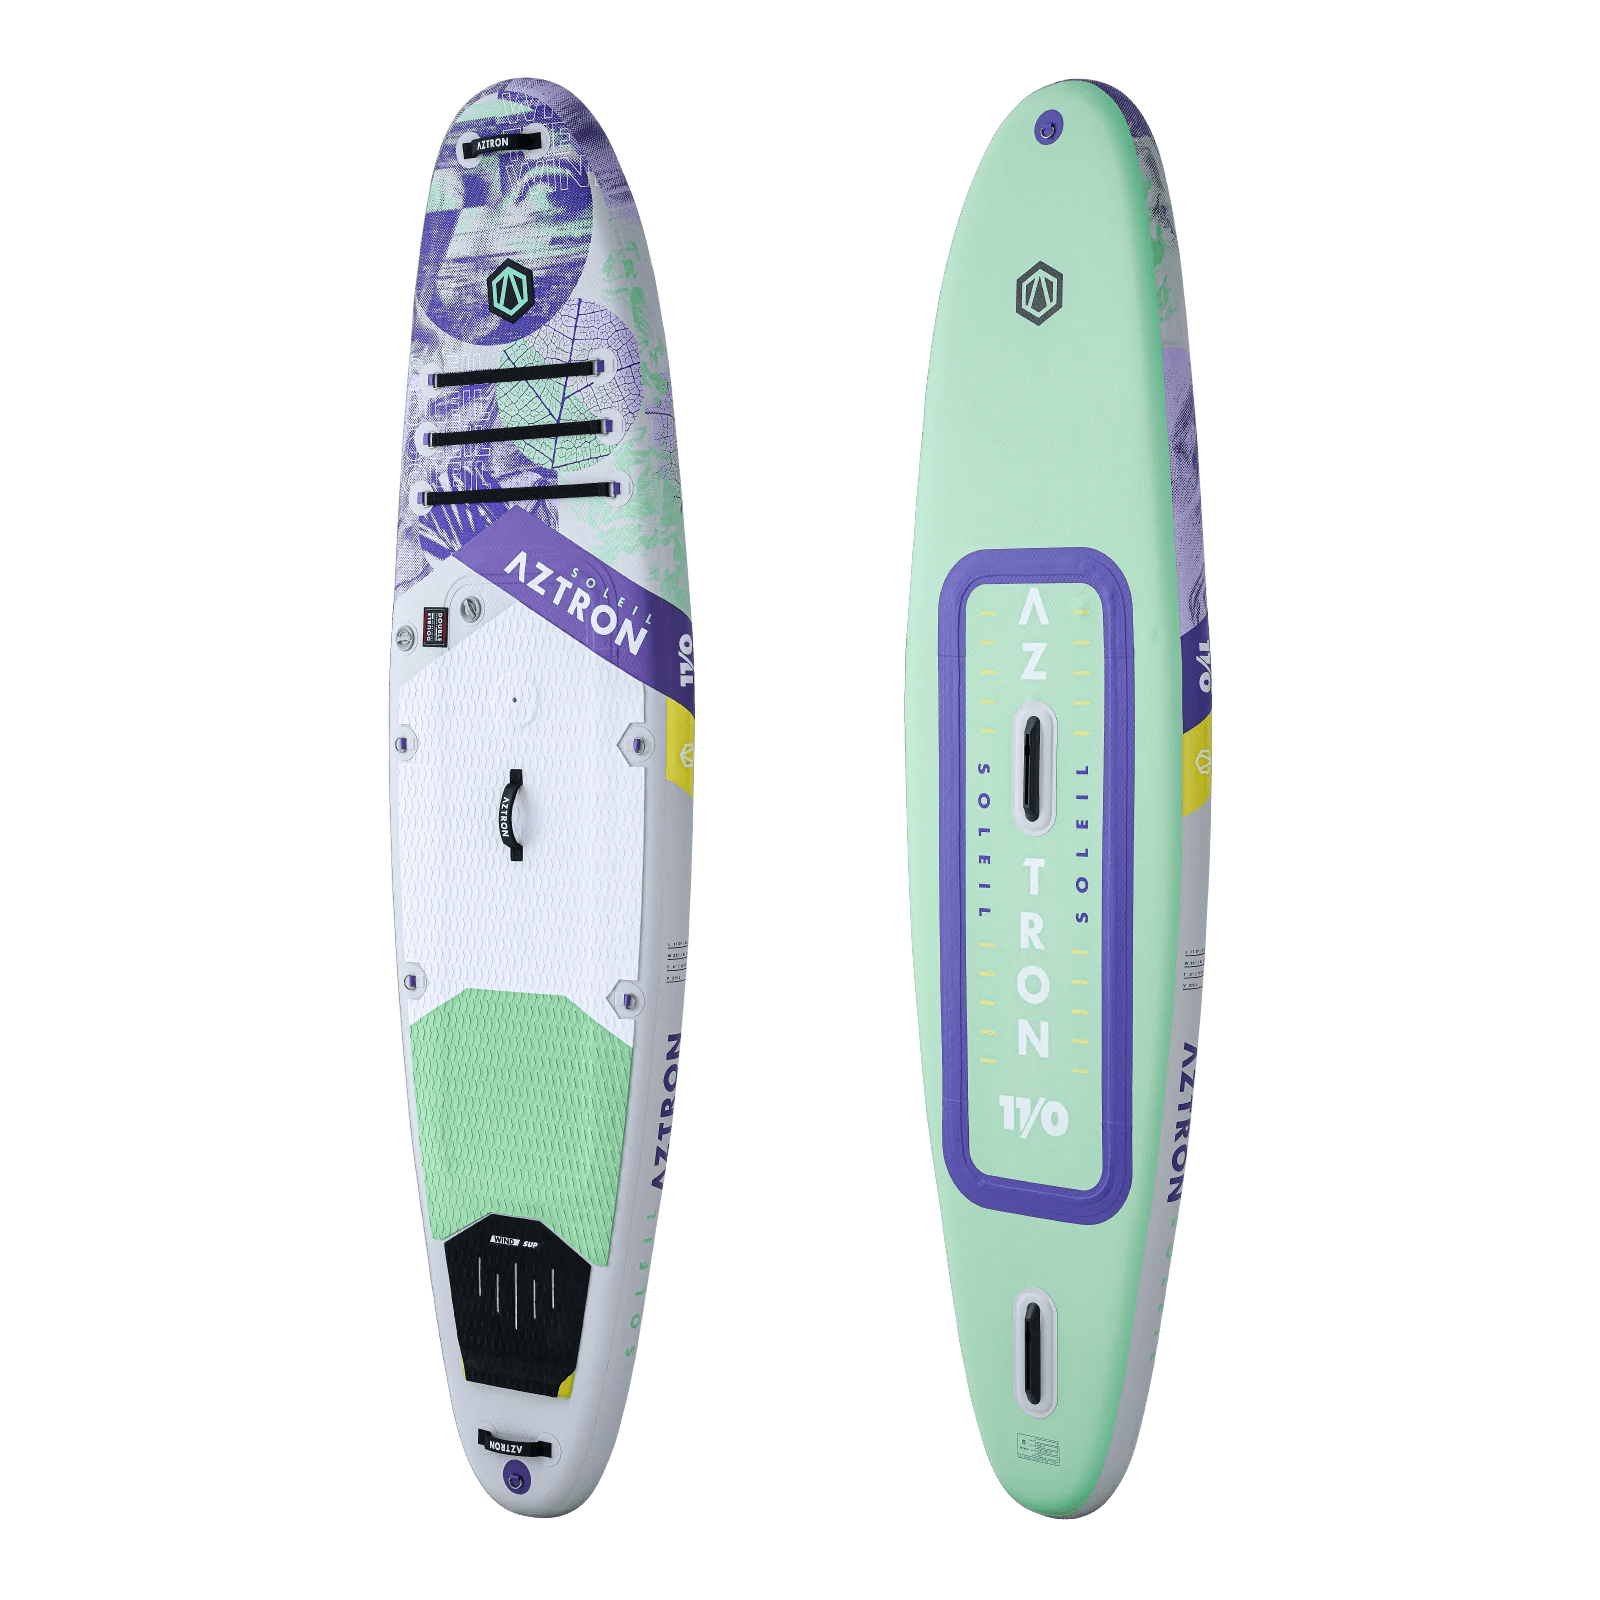 Aztron Soleil 11'0" 2023 - Worthing Watersports - SUP Inflatables - Aztron